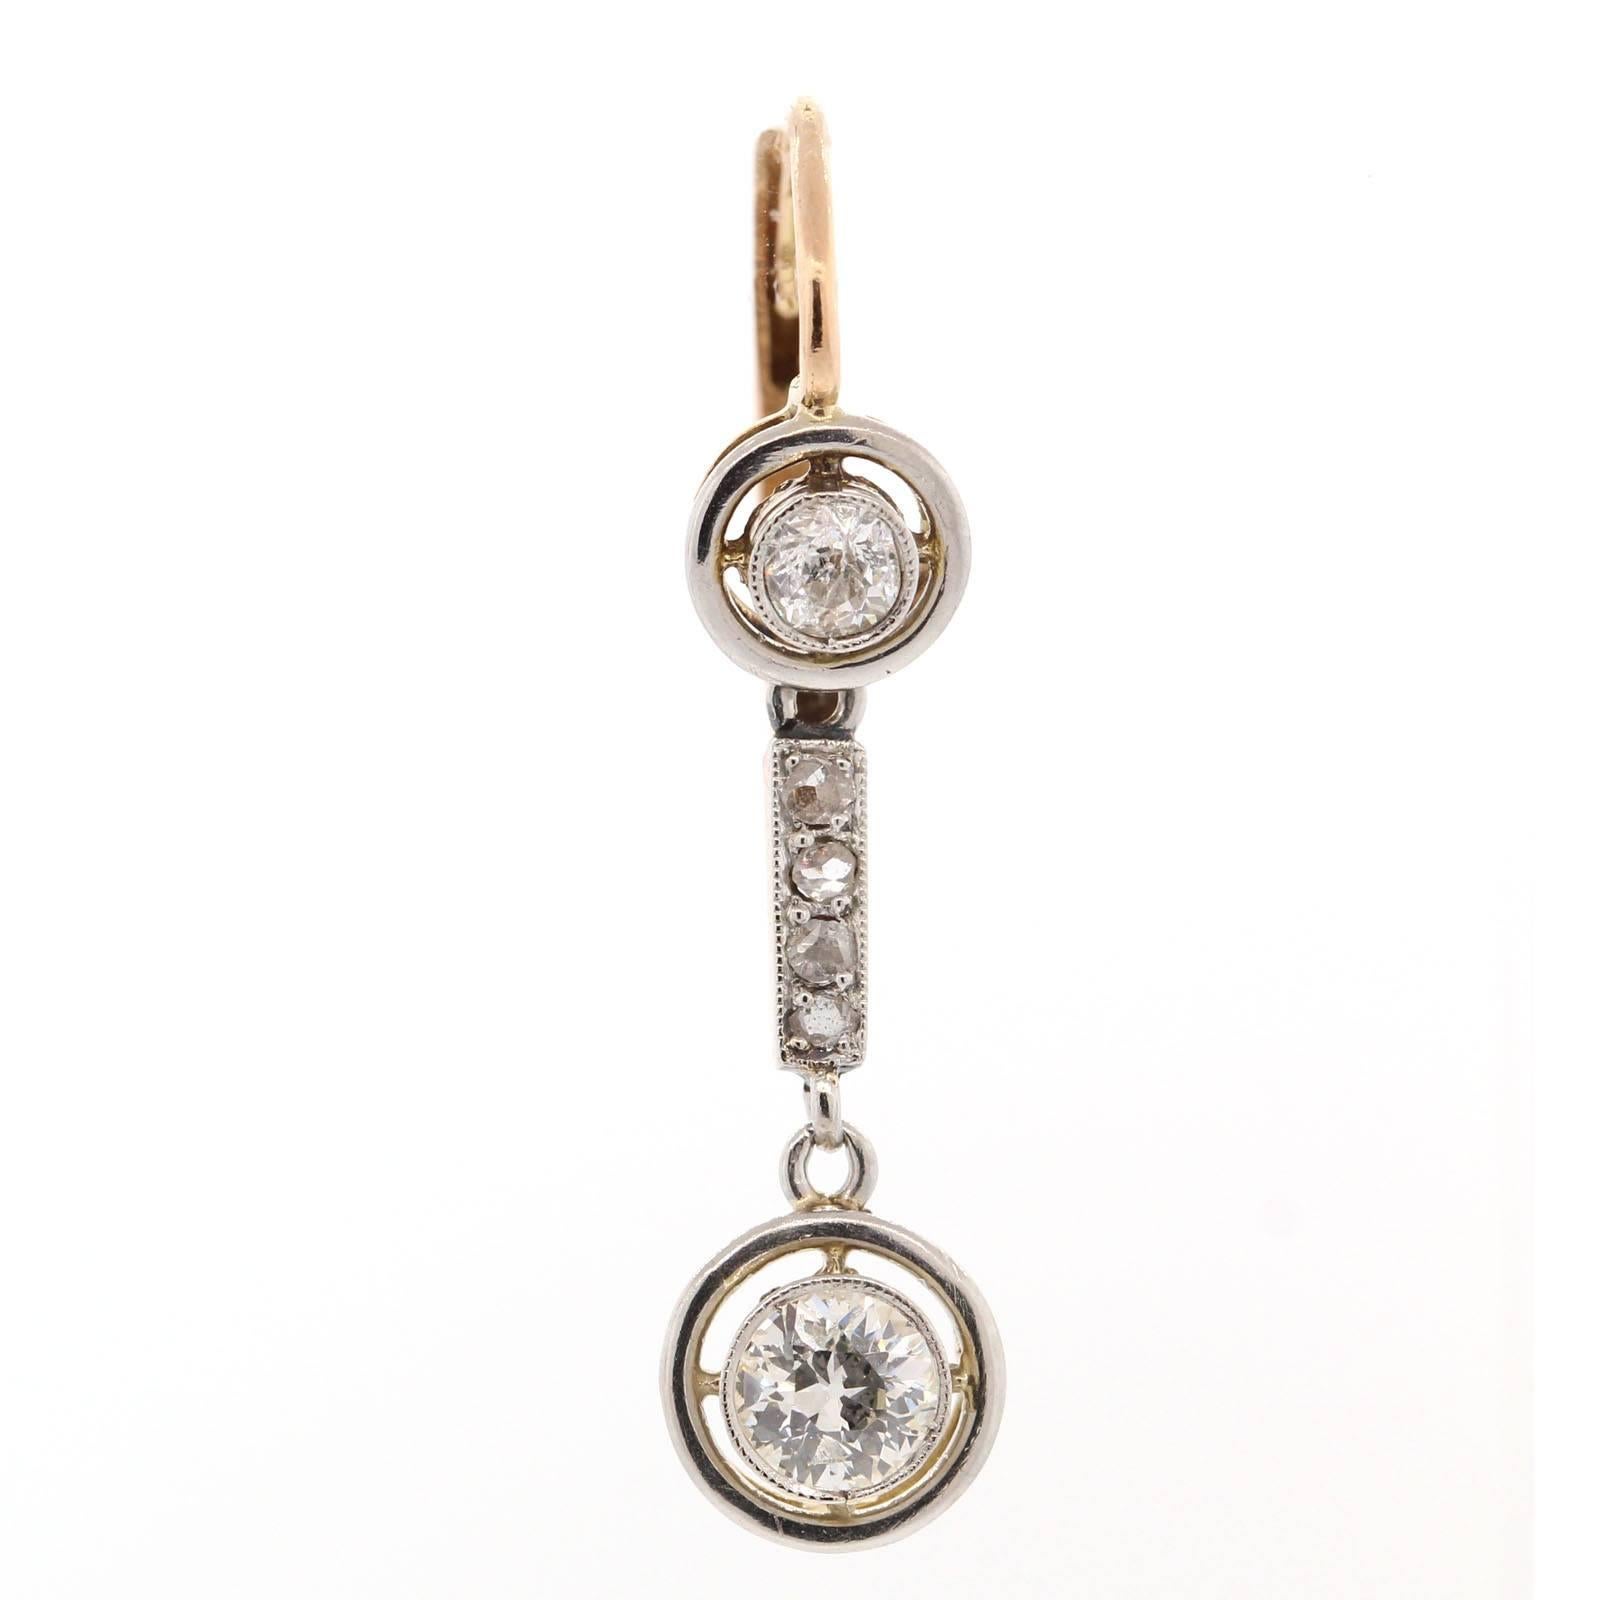 Delicately elegant these dangling 1930s platinum and 18KT diamond earrings, set with Old European Cut and Rose Cut Diamonds.  A forever gift!